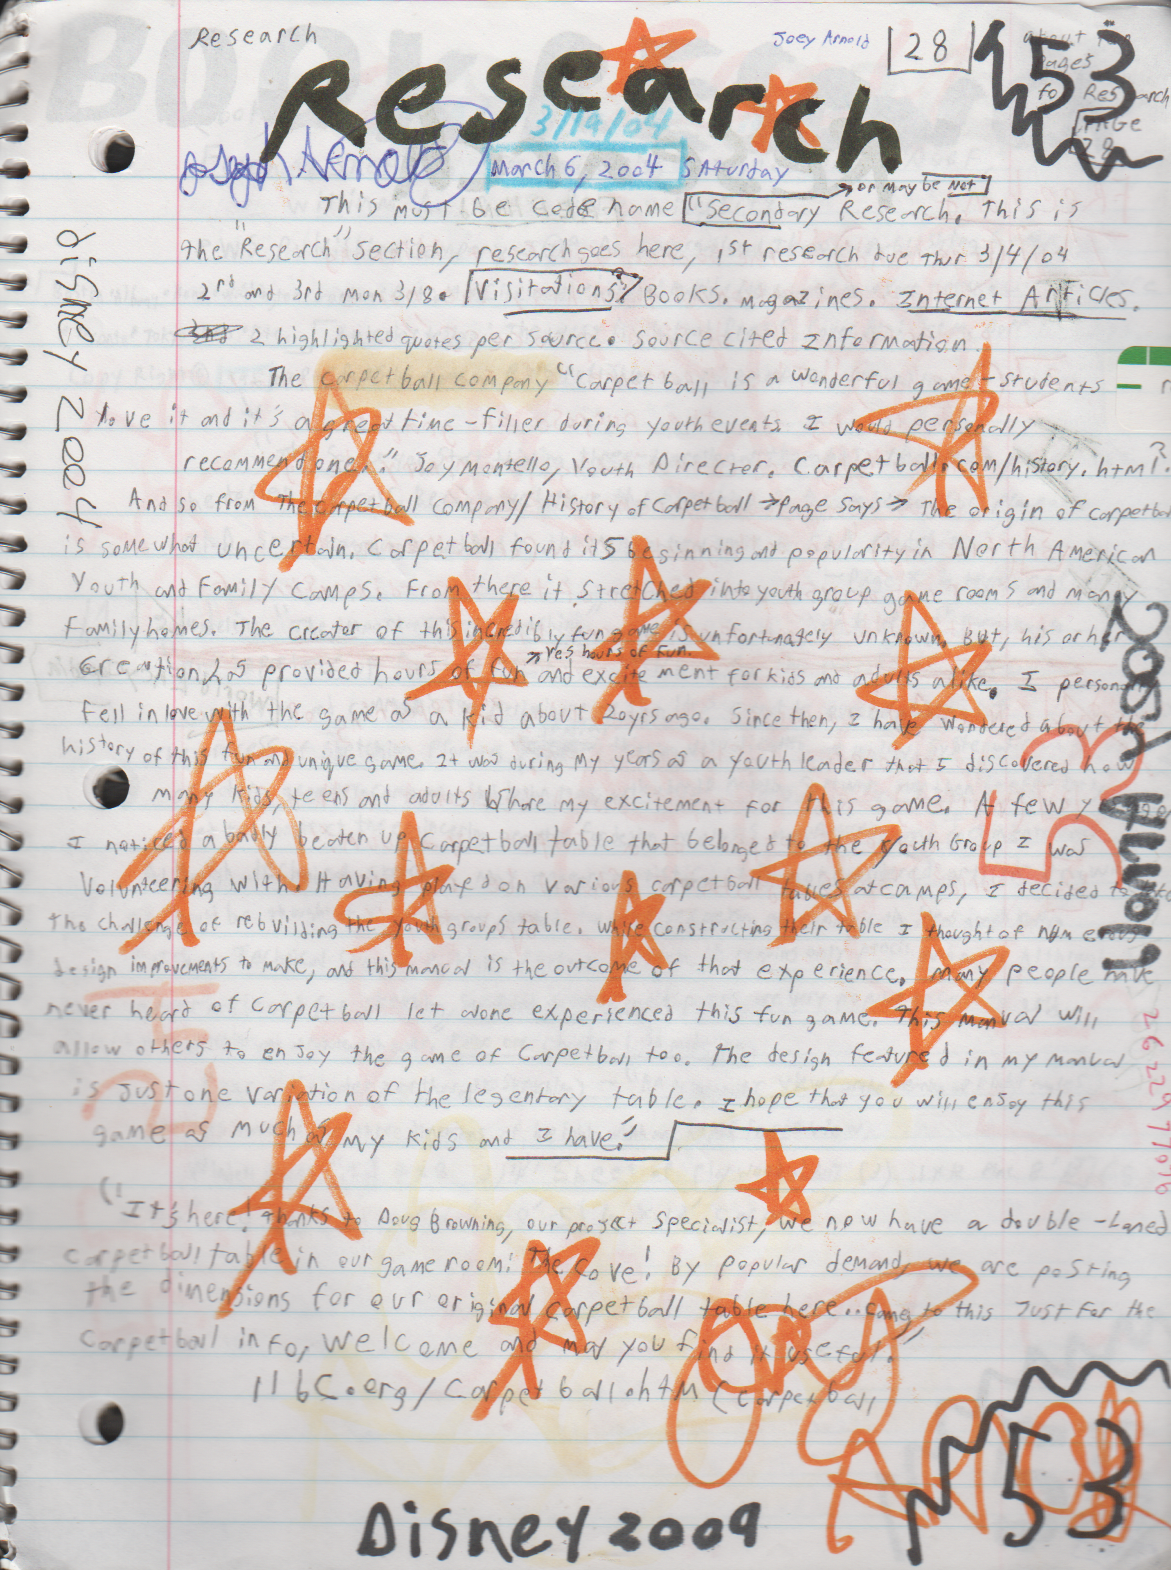 2004-01-29 - Thursday - Carpetball FGHS Senior Project Journal, Joey Arnold, Part 02, 96pages numbered, Notebook-51.png